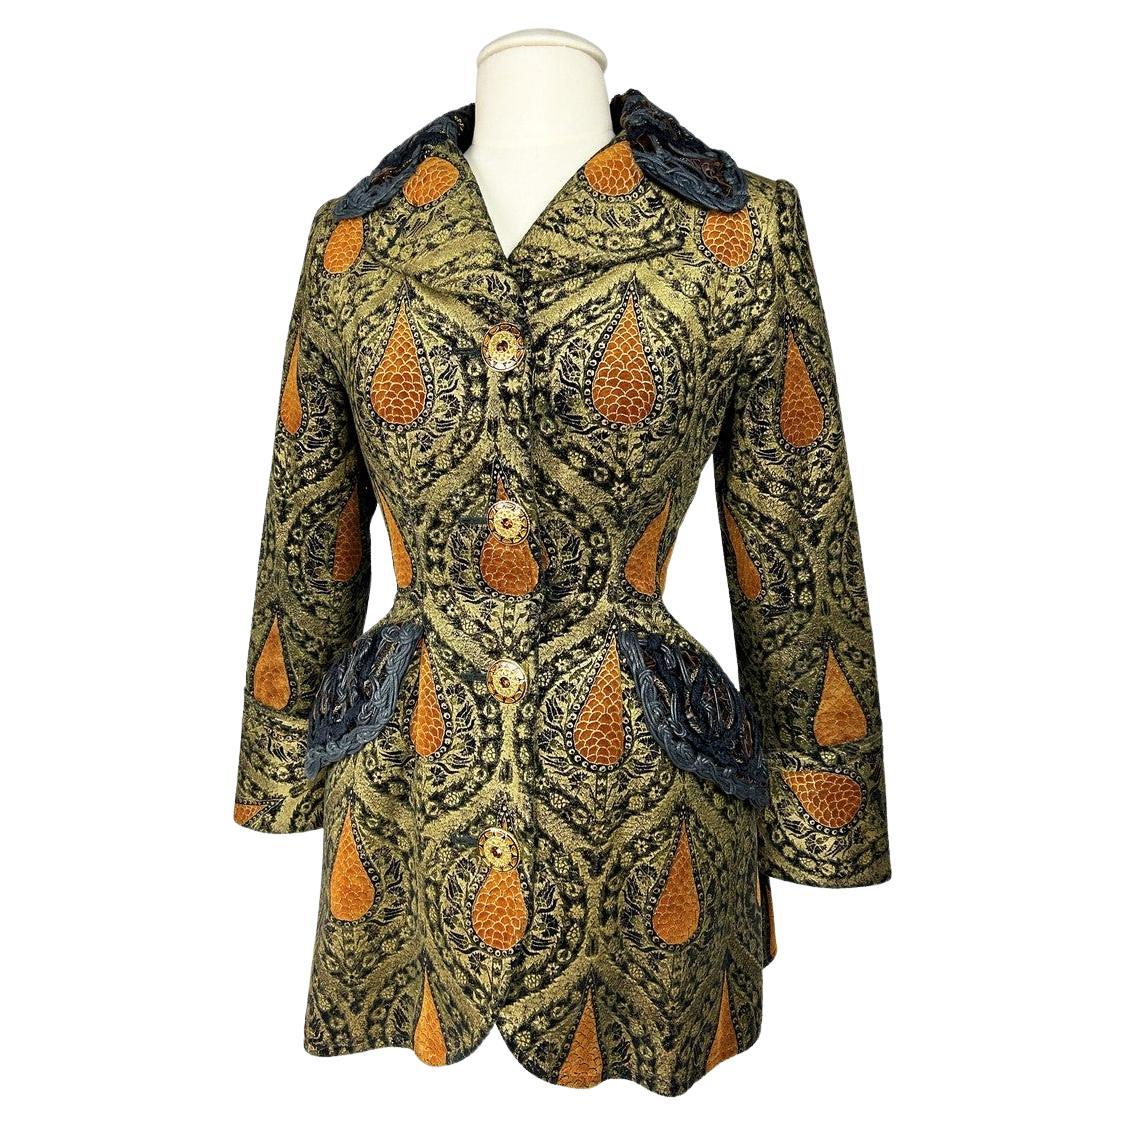 A Christian Lacroix Couture Frock Coat Golden Printed Jacket Circa 1990 For Sale